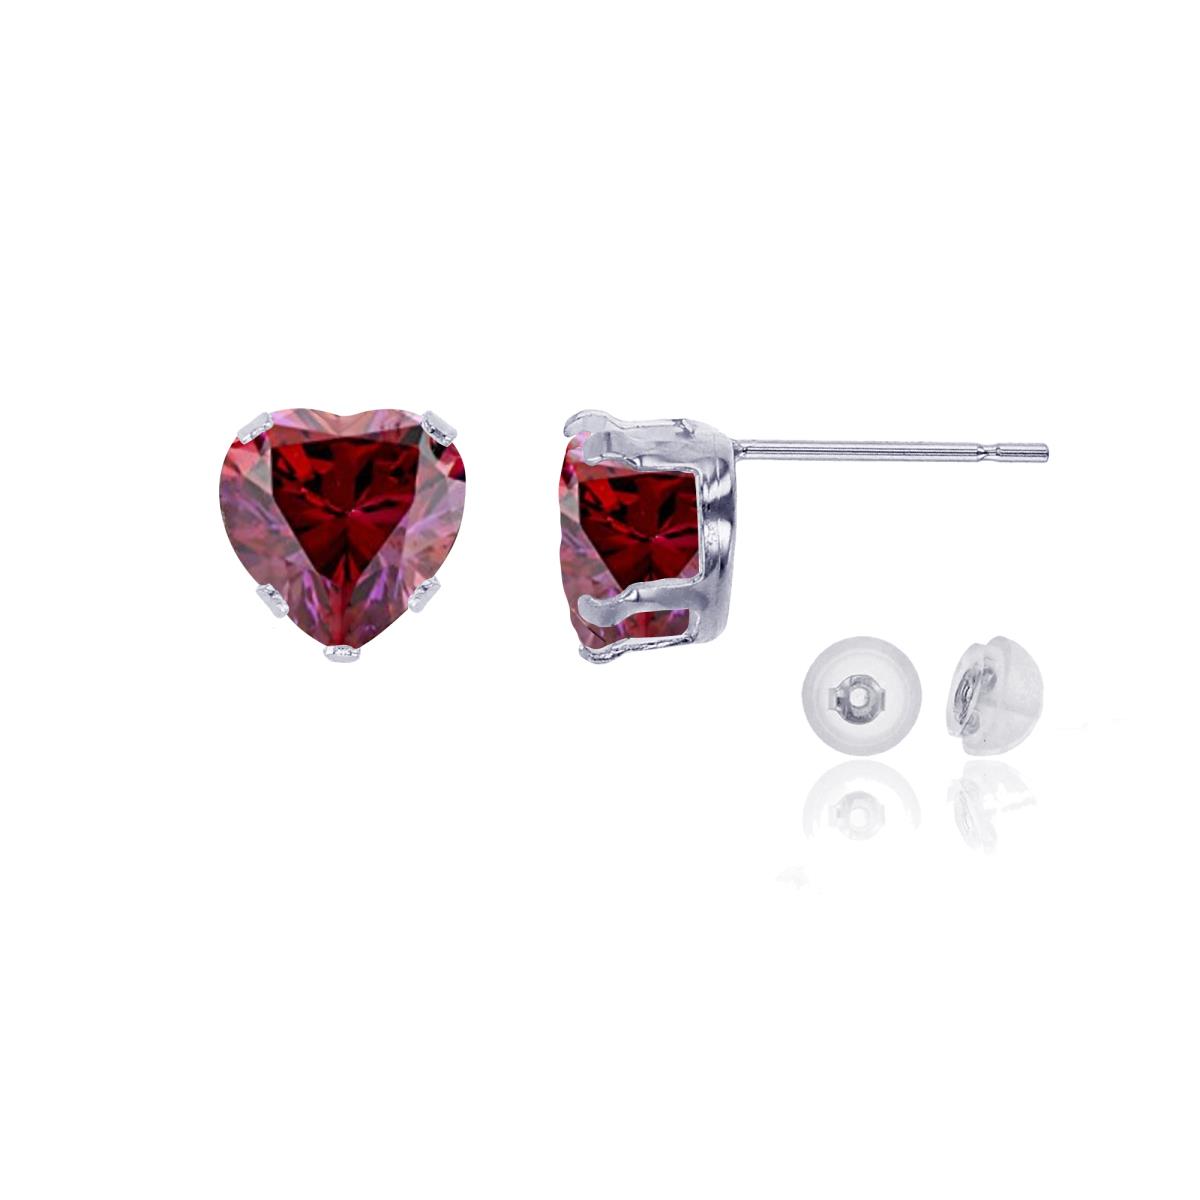 10K White Gold 5x5mm Heart Cr Ruby Stud Earring with Silicone Back